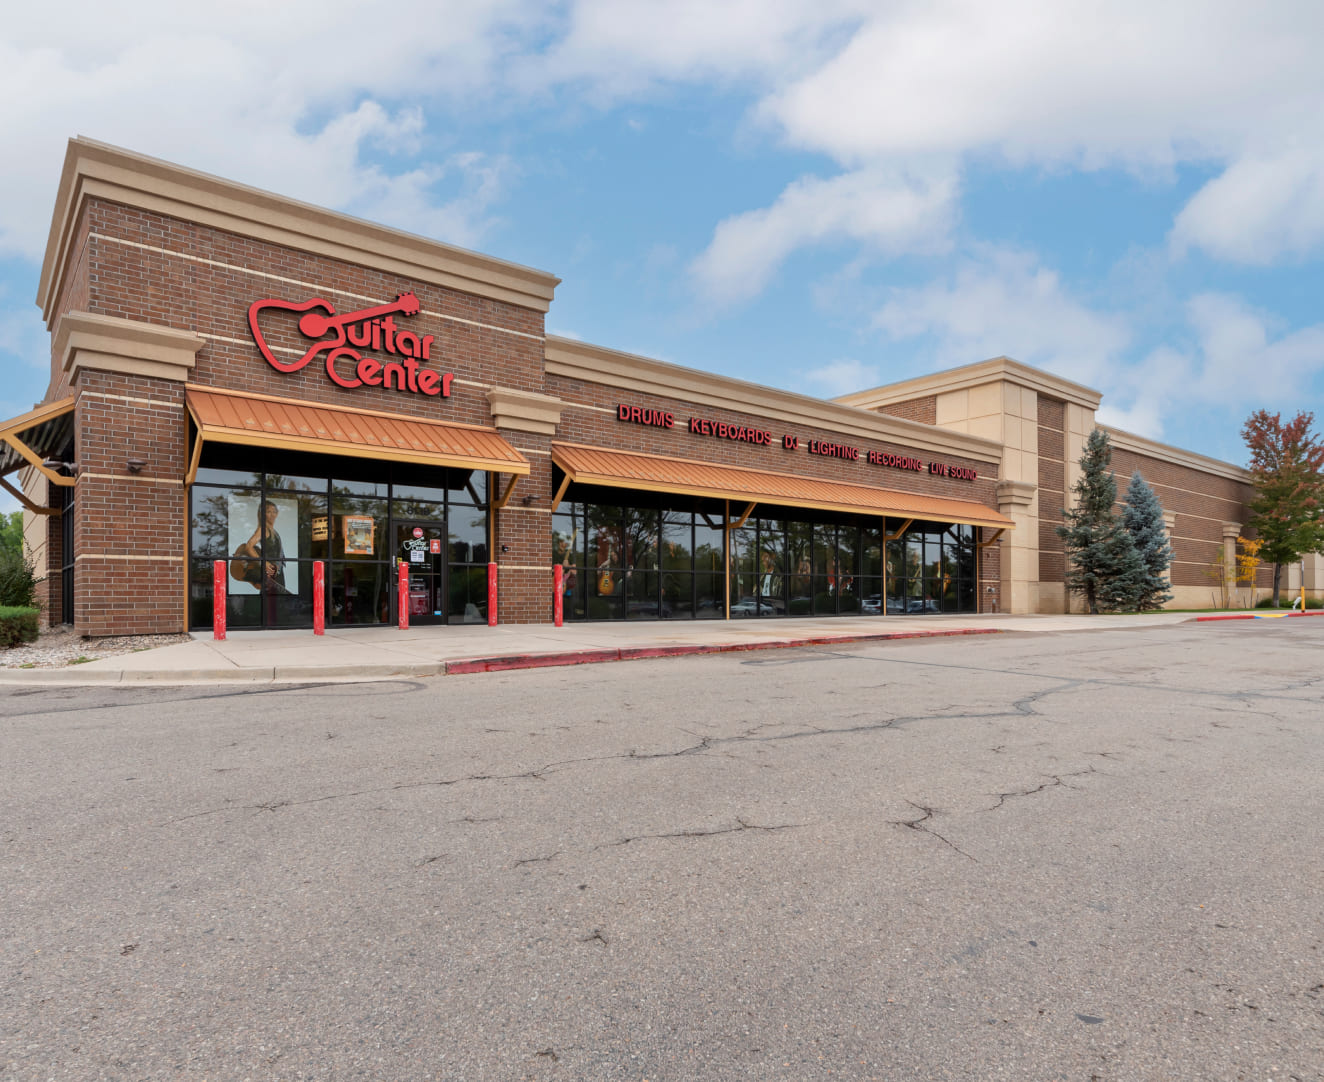 The exterior of the Guitar Center at 813-831 Harmony Road in Fort Collins, CO.